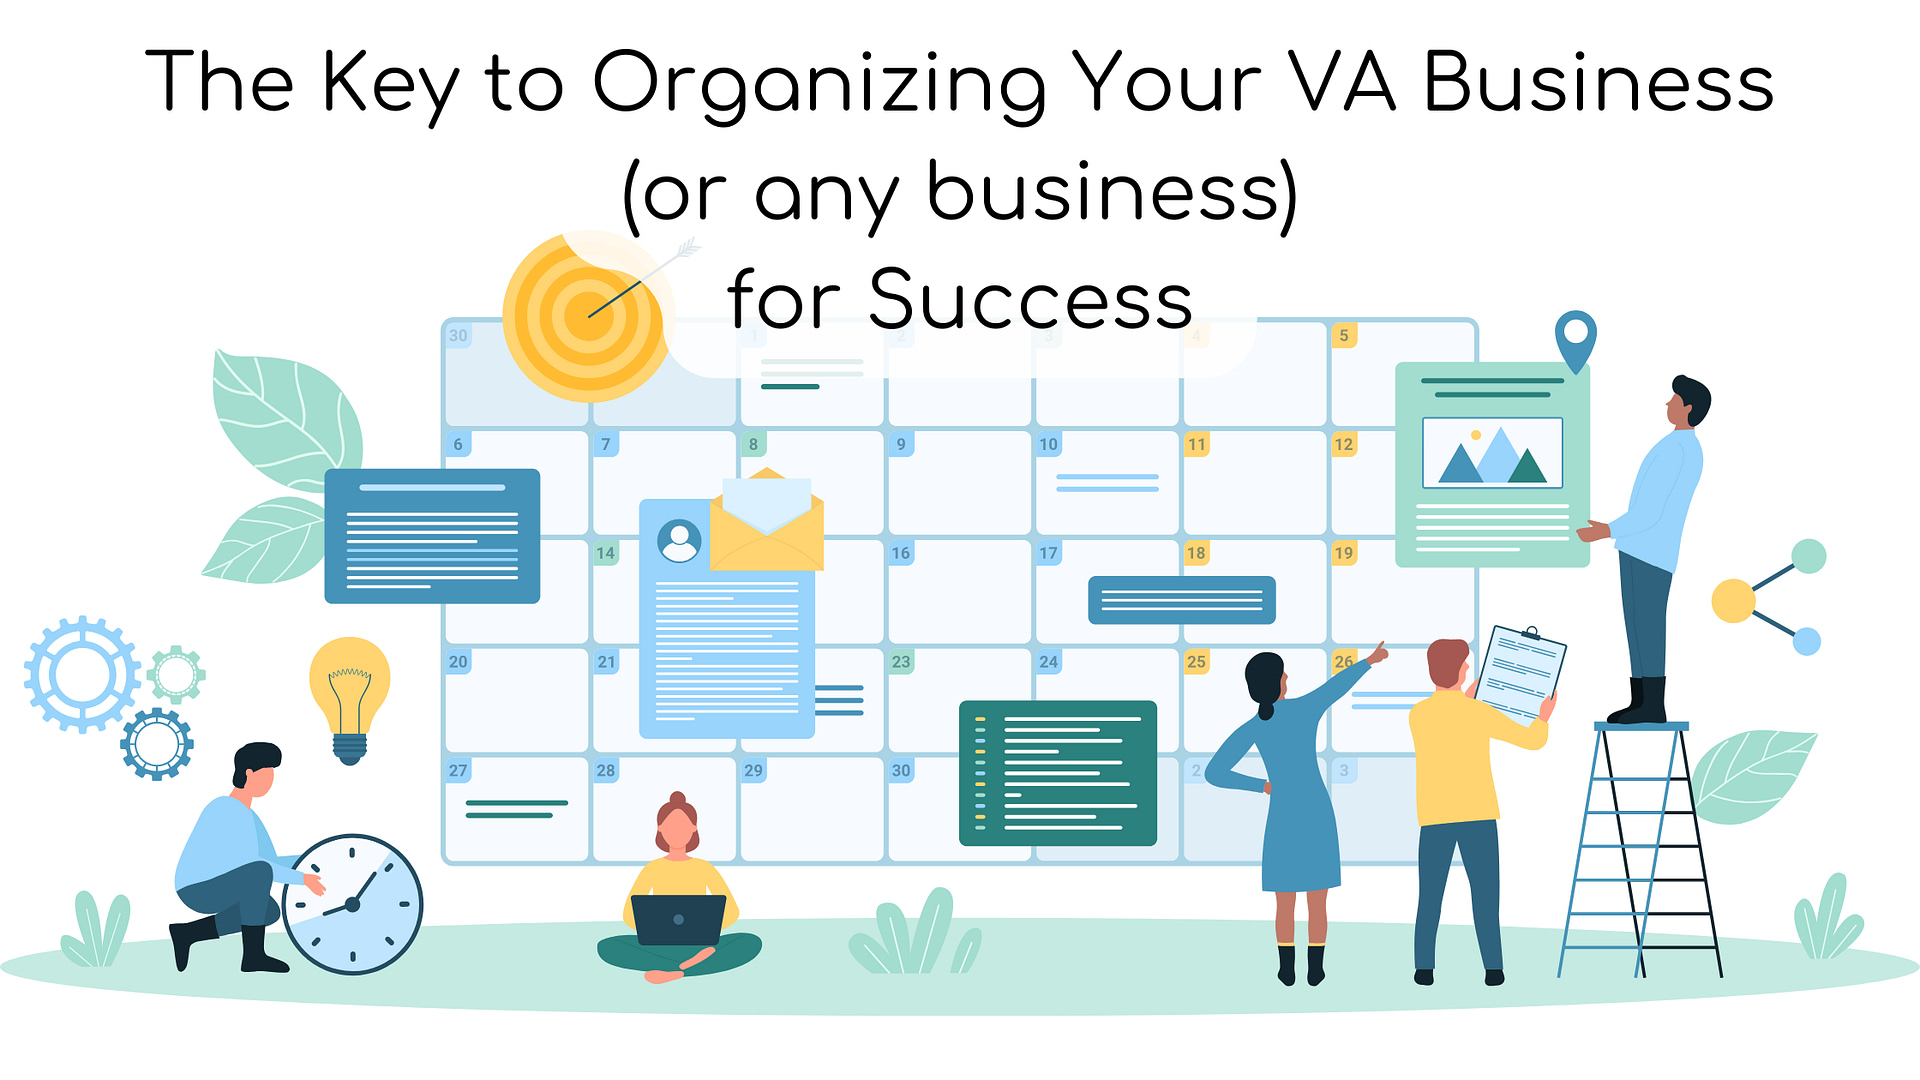 The Key to Organizing Your VA Business for Success